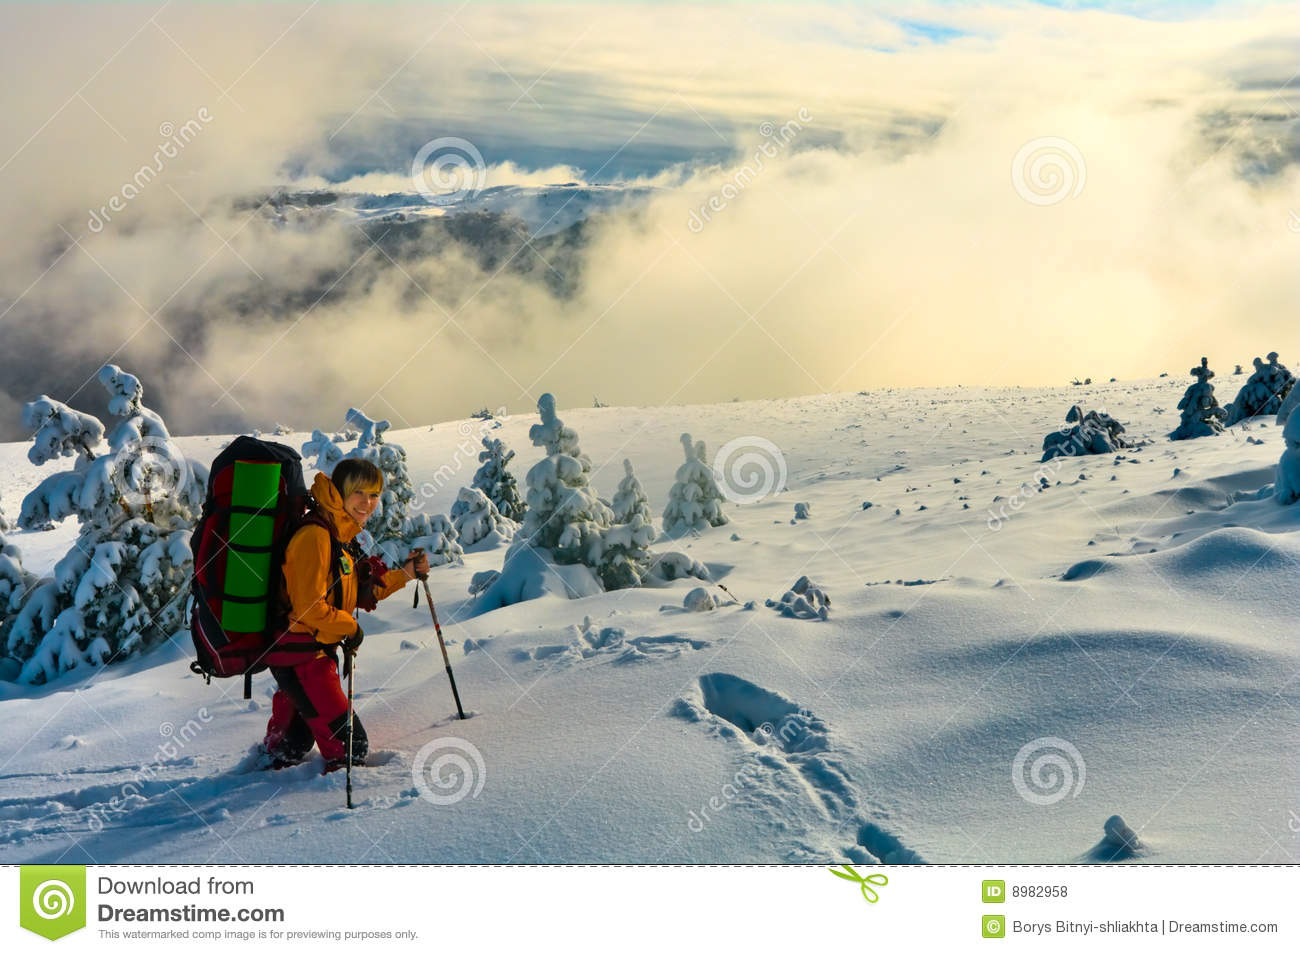 Woman Hiking In Deep Snow Royalty Free Stock Photos   Image  8982958